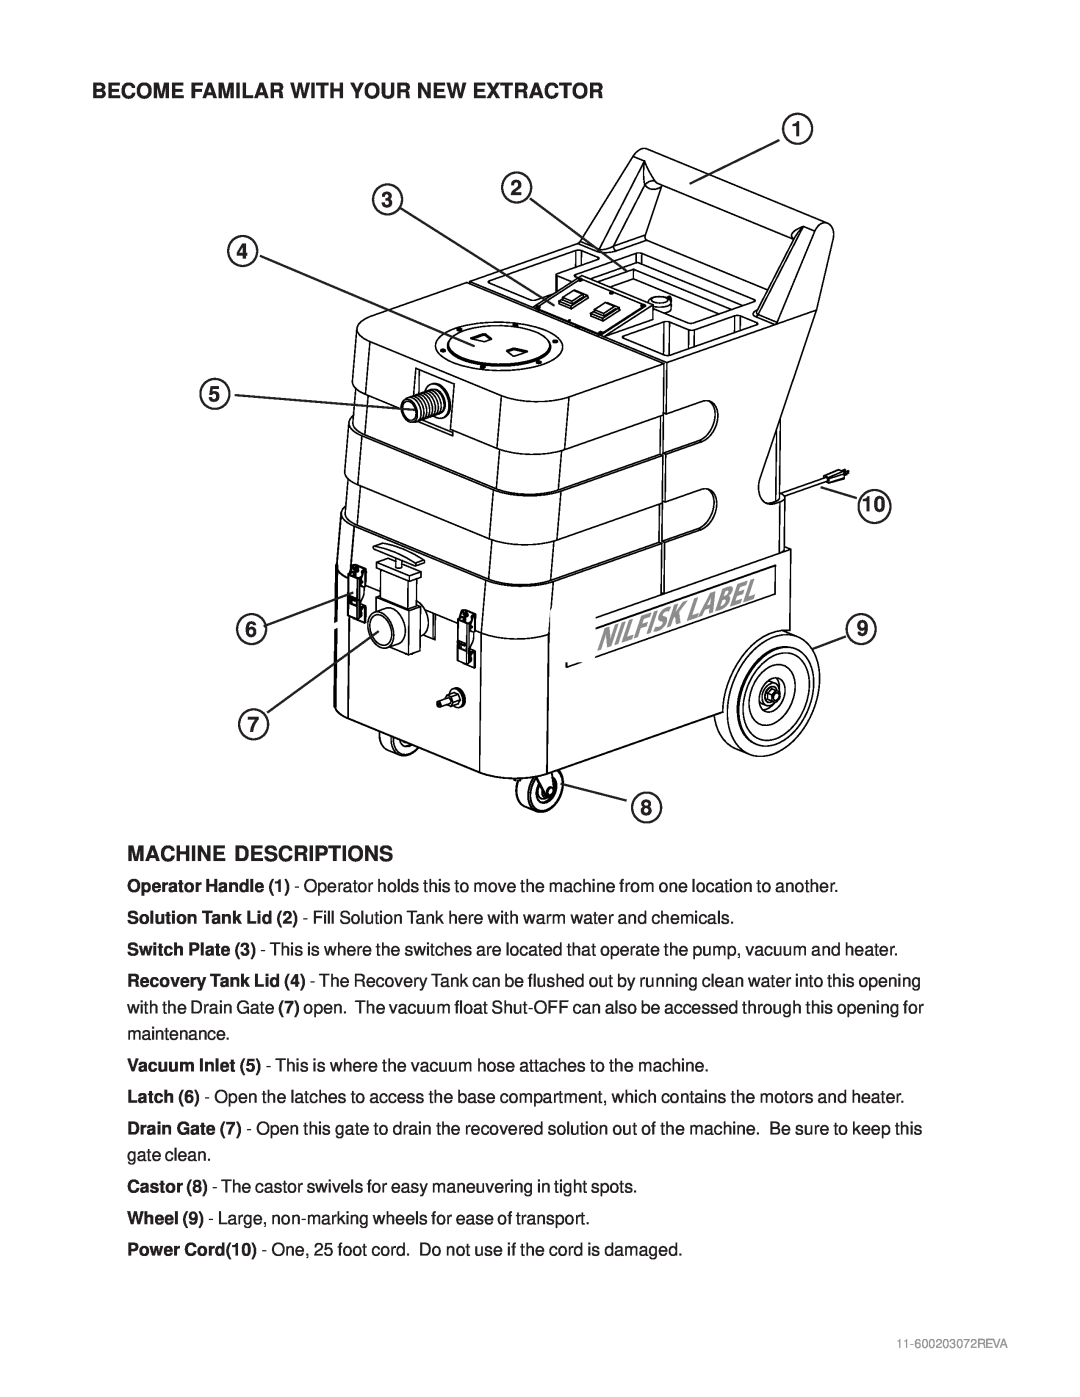 Nilfisk-Advance America MX 307 H instruction manual BECOME FAMILAR WITH YOUR NEW EXTRACTOR 1 3, 6 7 8 MACHINE DESCRIPTIONS 